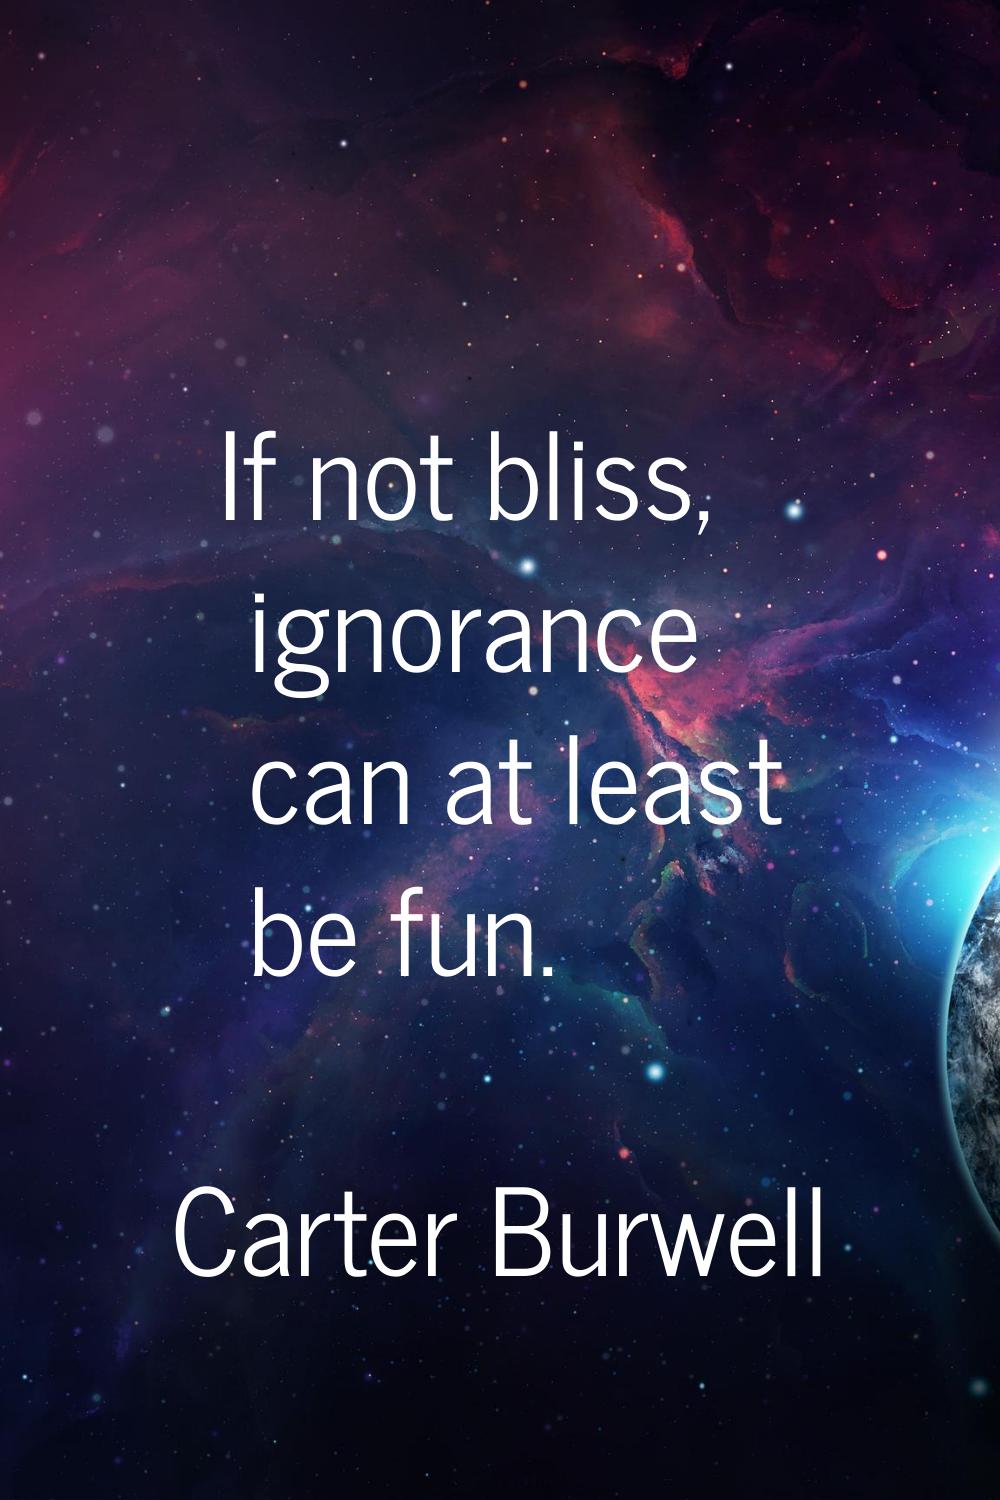 If not bliss, ignorance can at least be fun.